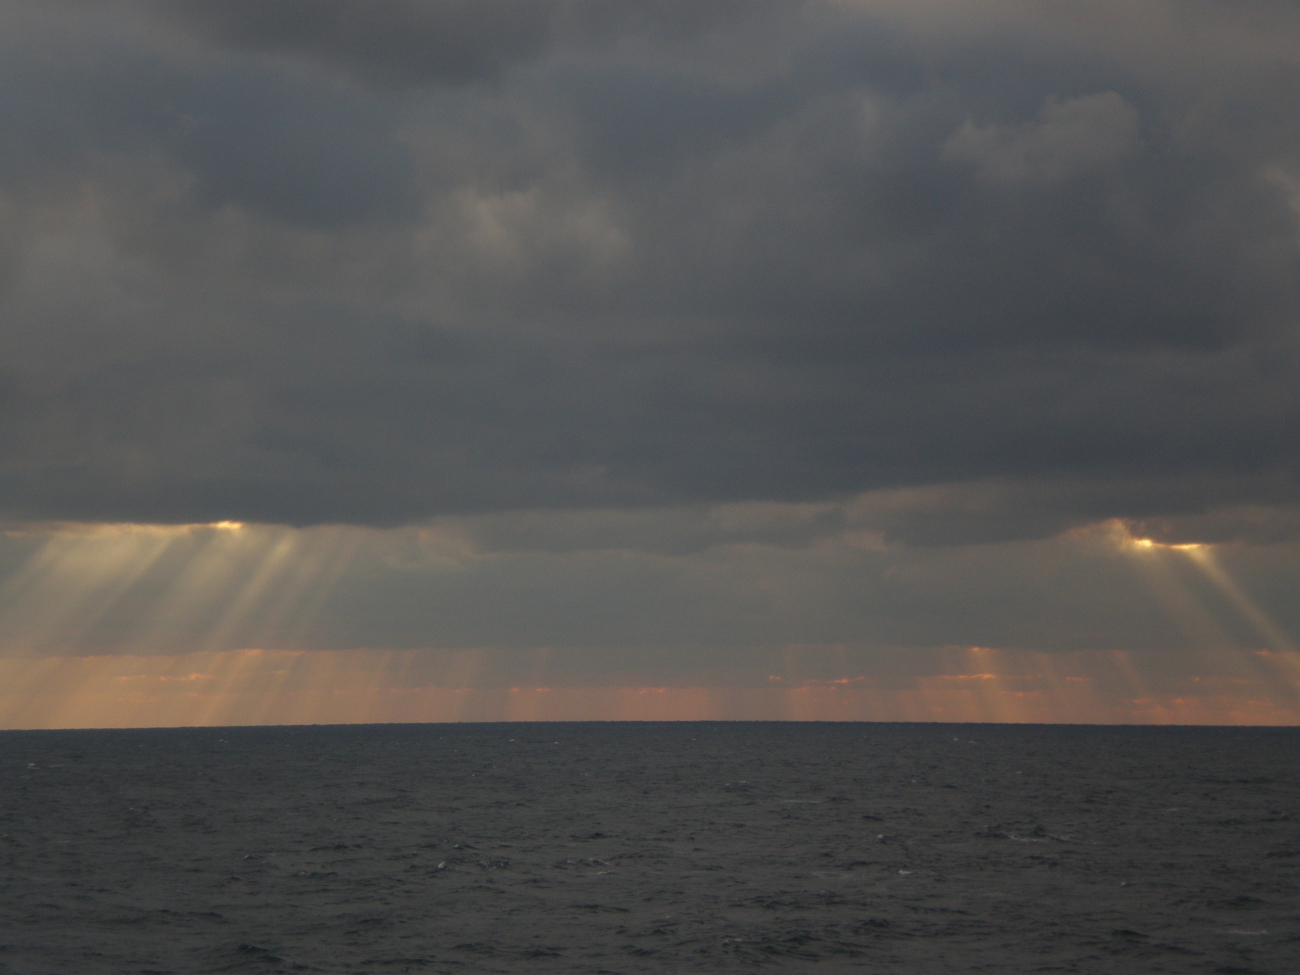 Crepuscular rays over the Gulf of Mexico